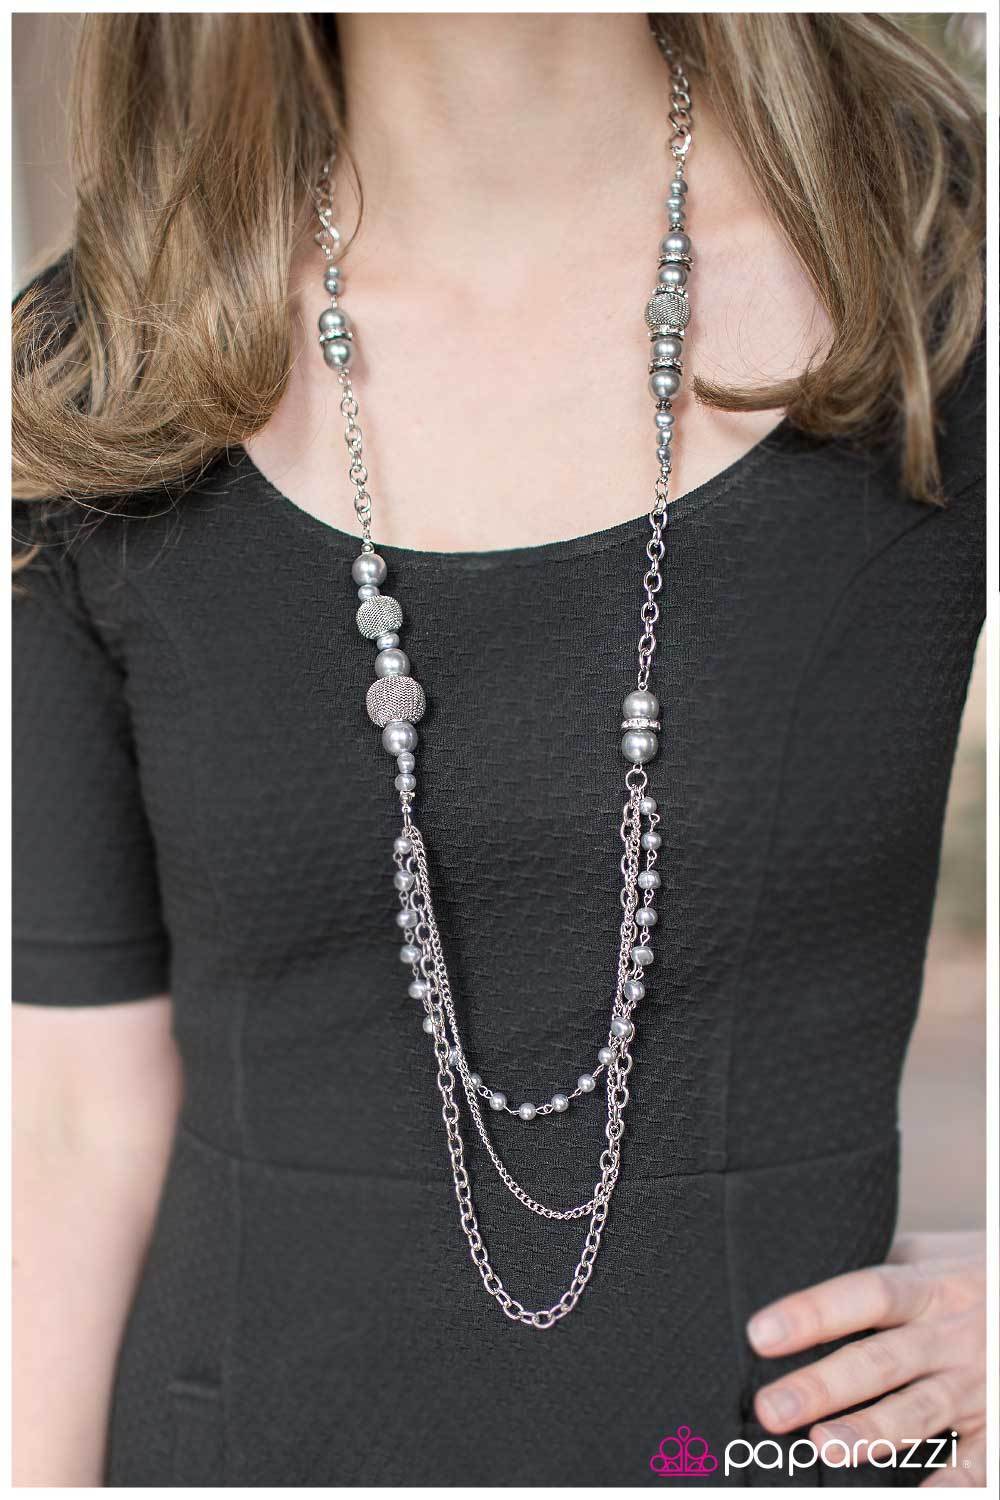 Enmeshed in Elegance Long Silver Necklace and matching Earrings - Paparazzi Accessories - lightbox -CarasShop.com - $5 Jewelry by Cara Jewels